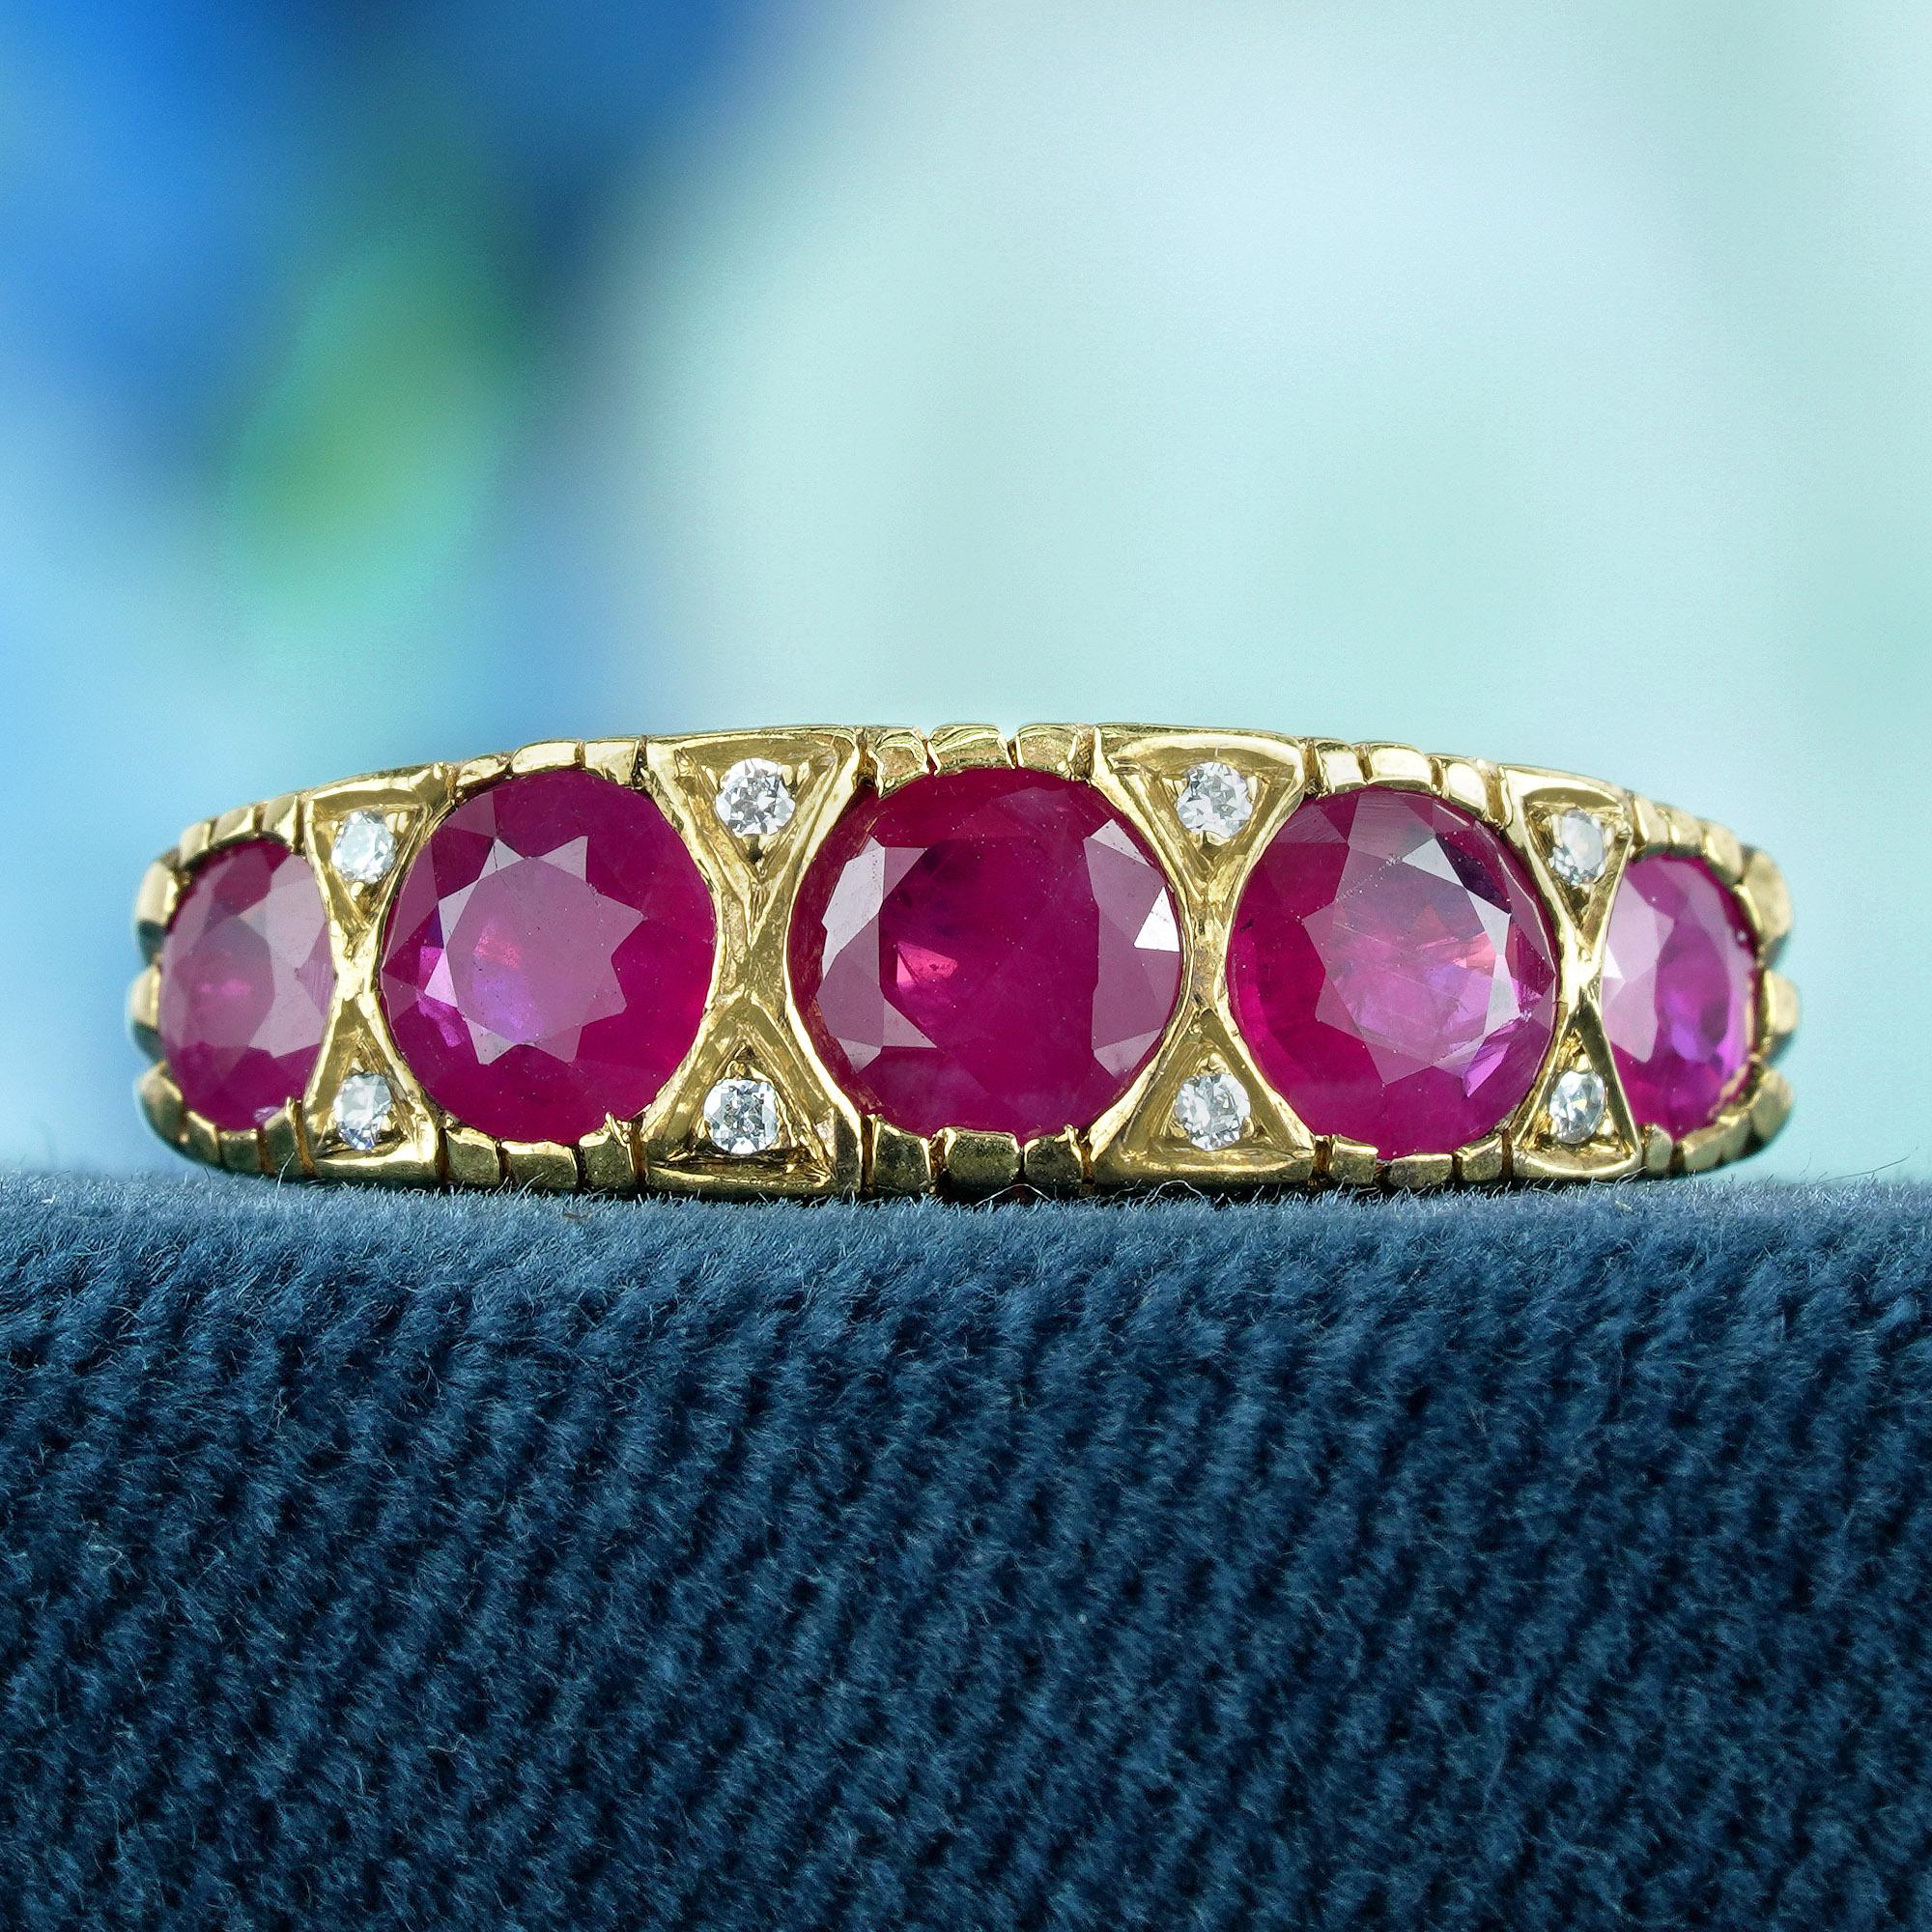 This exquisite vintage-inspired ring embellished with round, natural red rubies, resting upon a sleek and lustrous yellow gold band accentuated by small round diamonds between each five stones. The ring's delicate five-stone setting whispers of